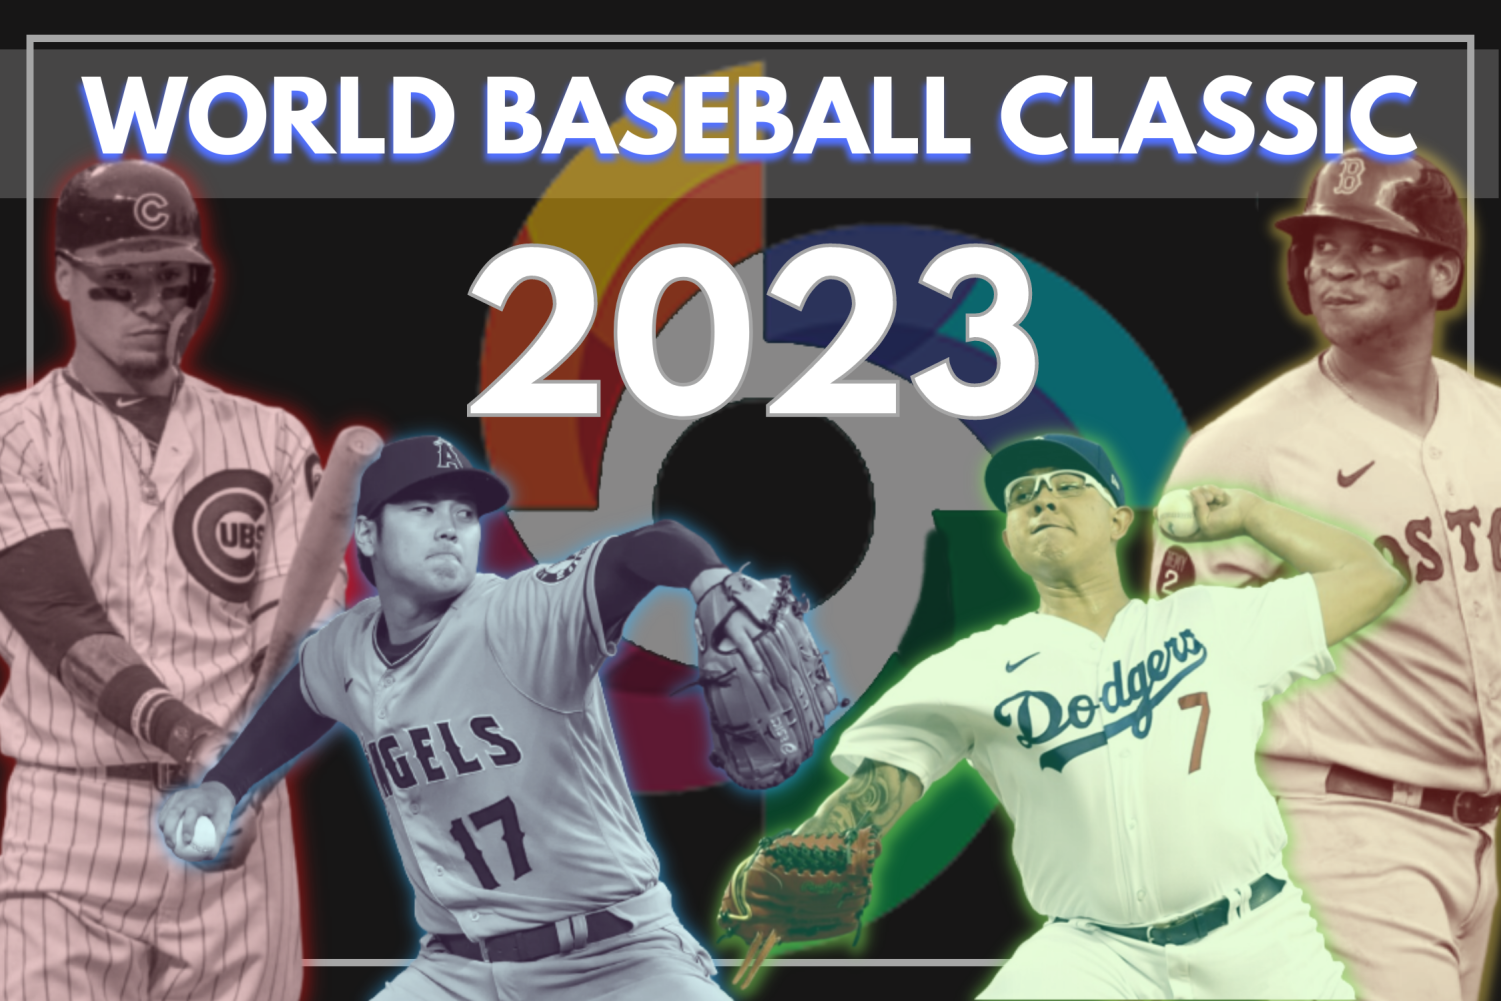 Baseball's best found purpose and passion in 2023 WBC